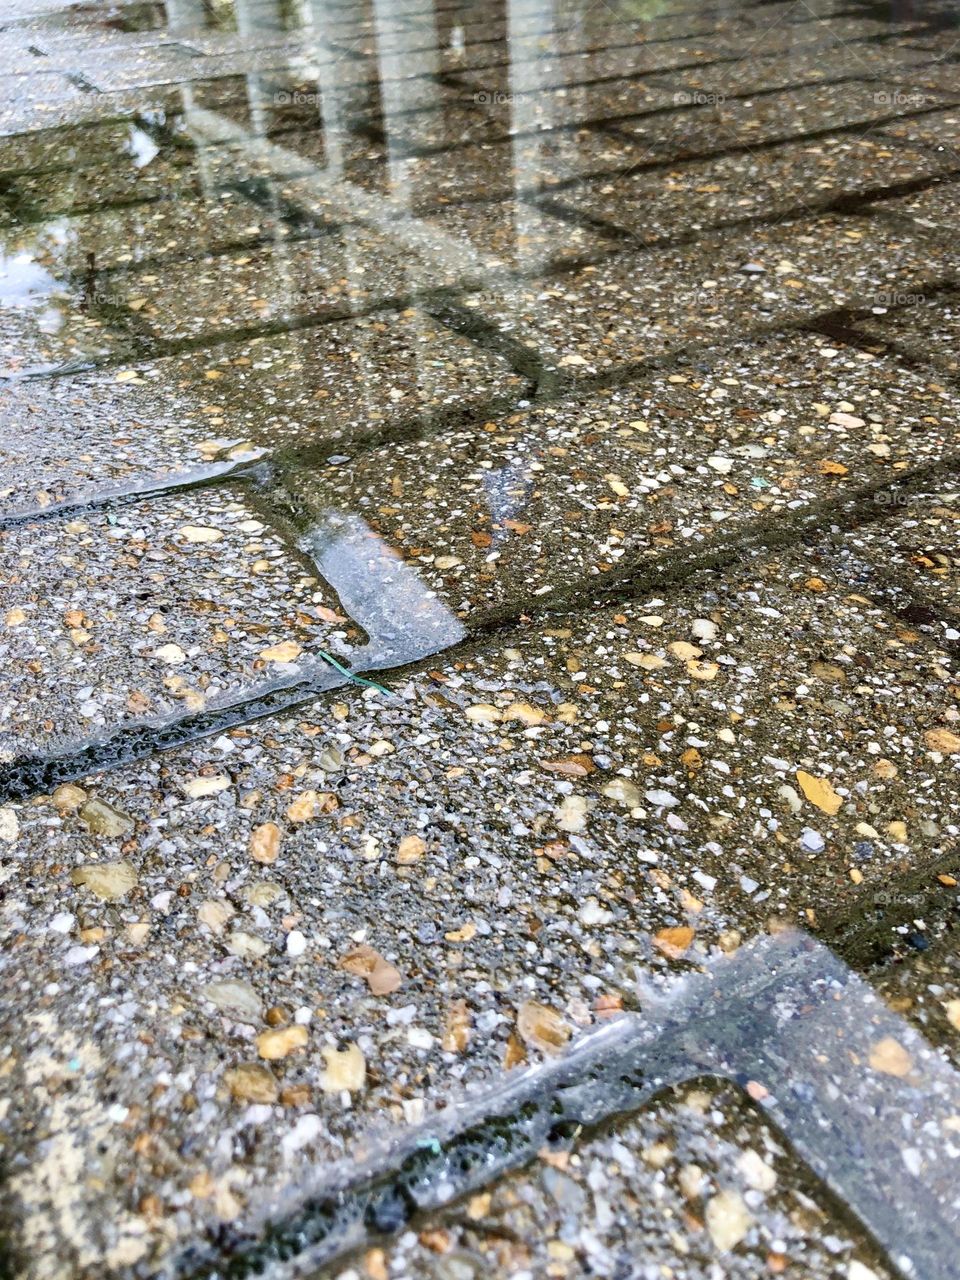 Low angle closeup of city brick sidewalk. The rain has covered the stones and offered a partial reflection of the urban scene